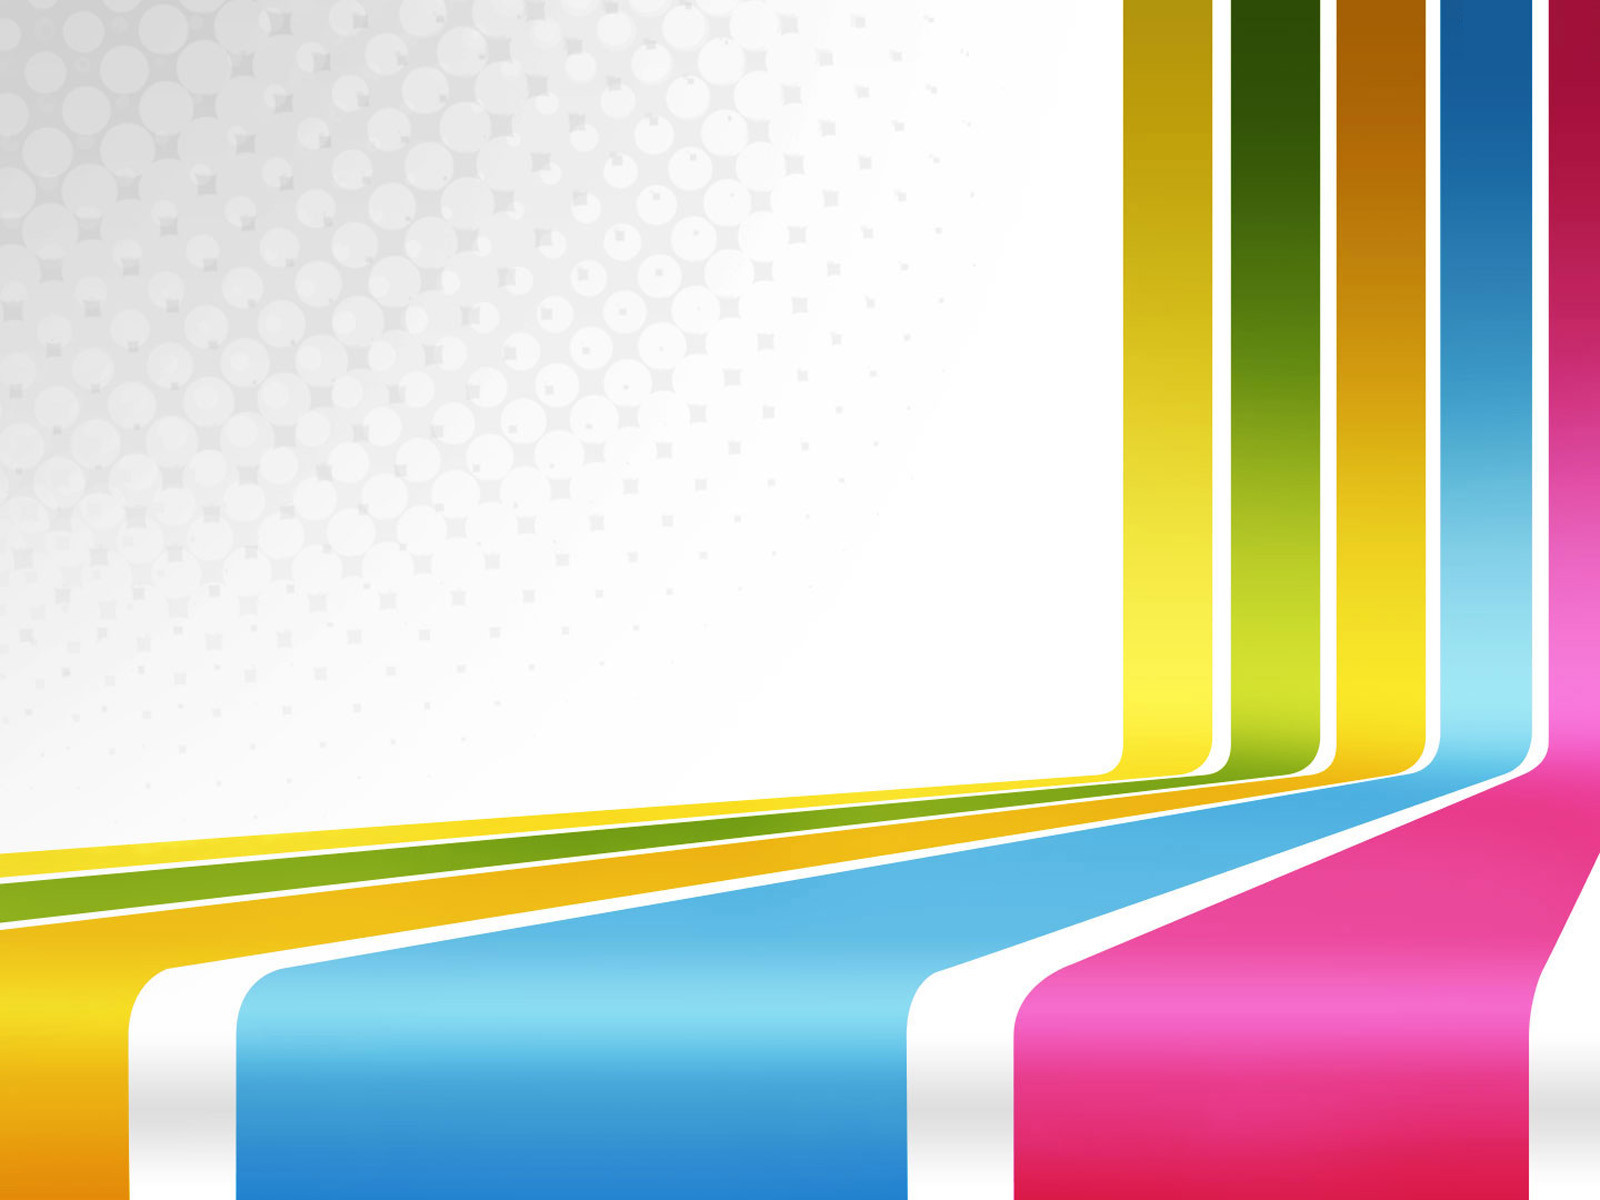 Stunning retro Backgrounds | 3D, Blue, Design, Orange, Pink, White, Yellow  Templates | Free PPT Grounds